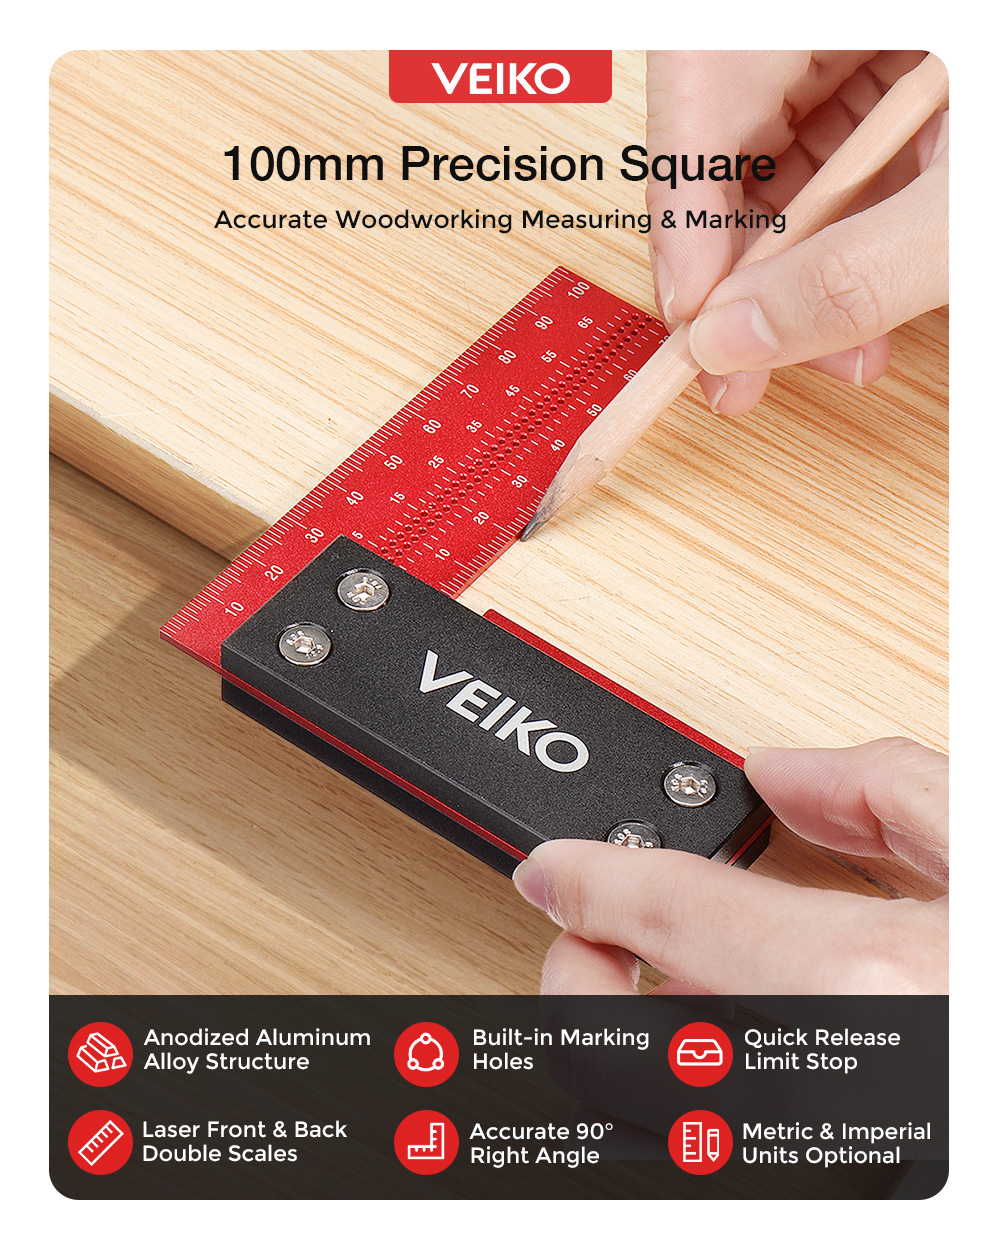 VEIKO-100mm4Inch-Aluminum-Alloy-Woodworking-Ruler-Precision-Square-Guaranteed-T-Speed-Measurements-R-1928717-1